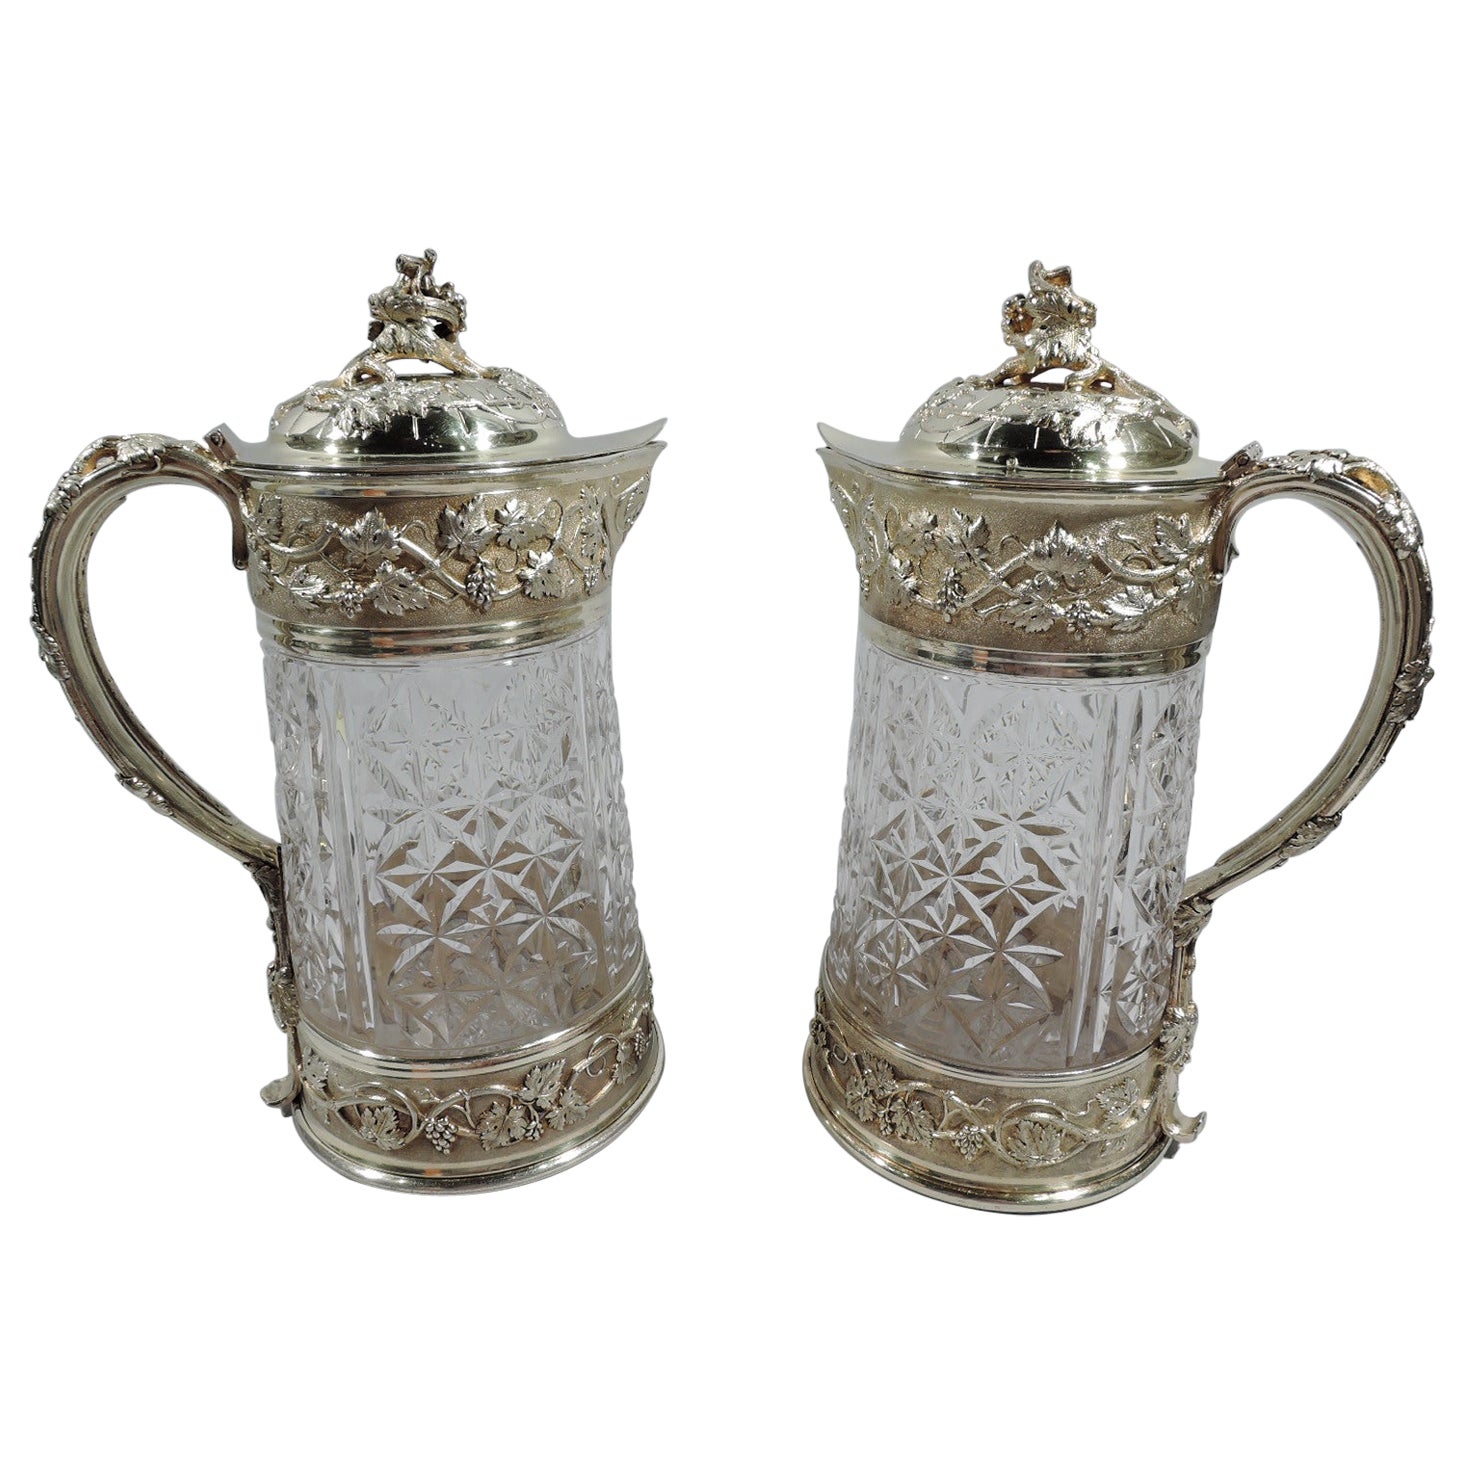 Pair of Antique Odiot Belle Epoque Silver Gilt & Cut-Glass Decanters